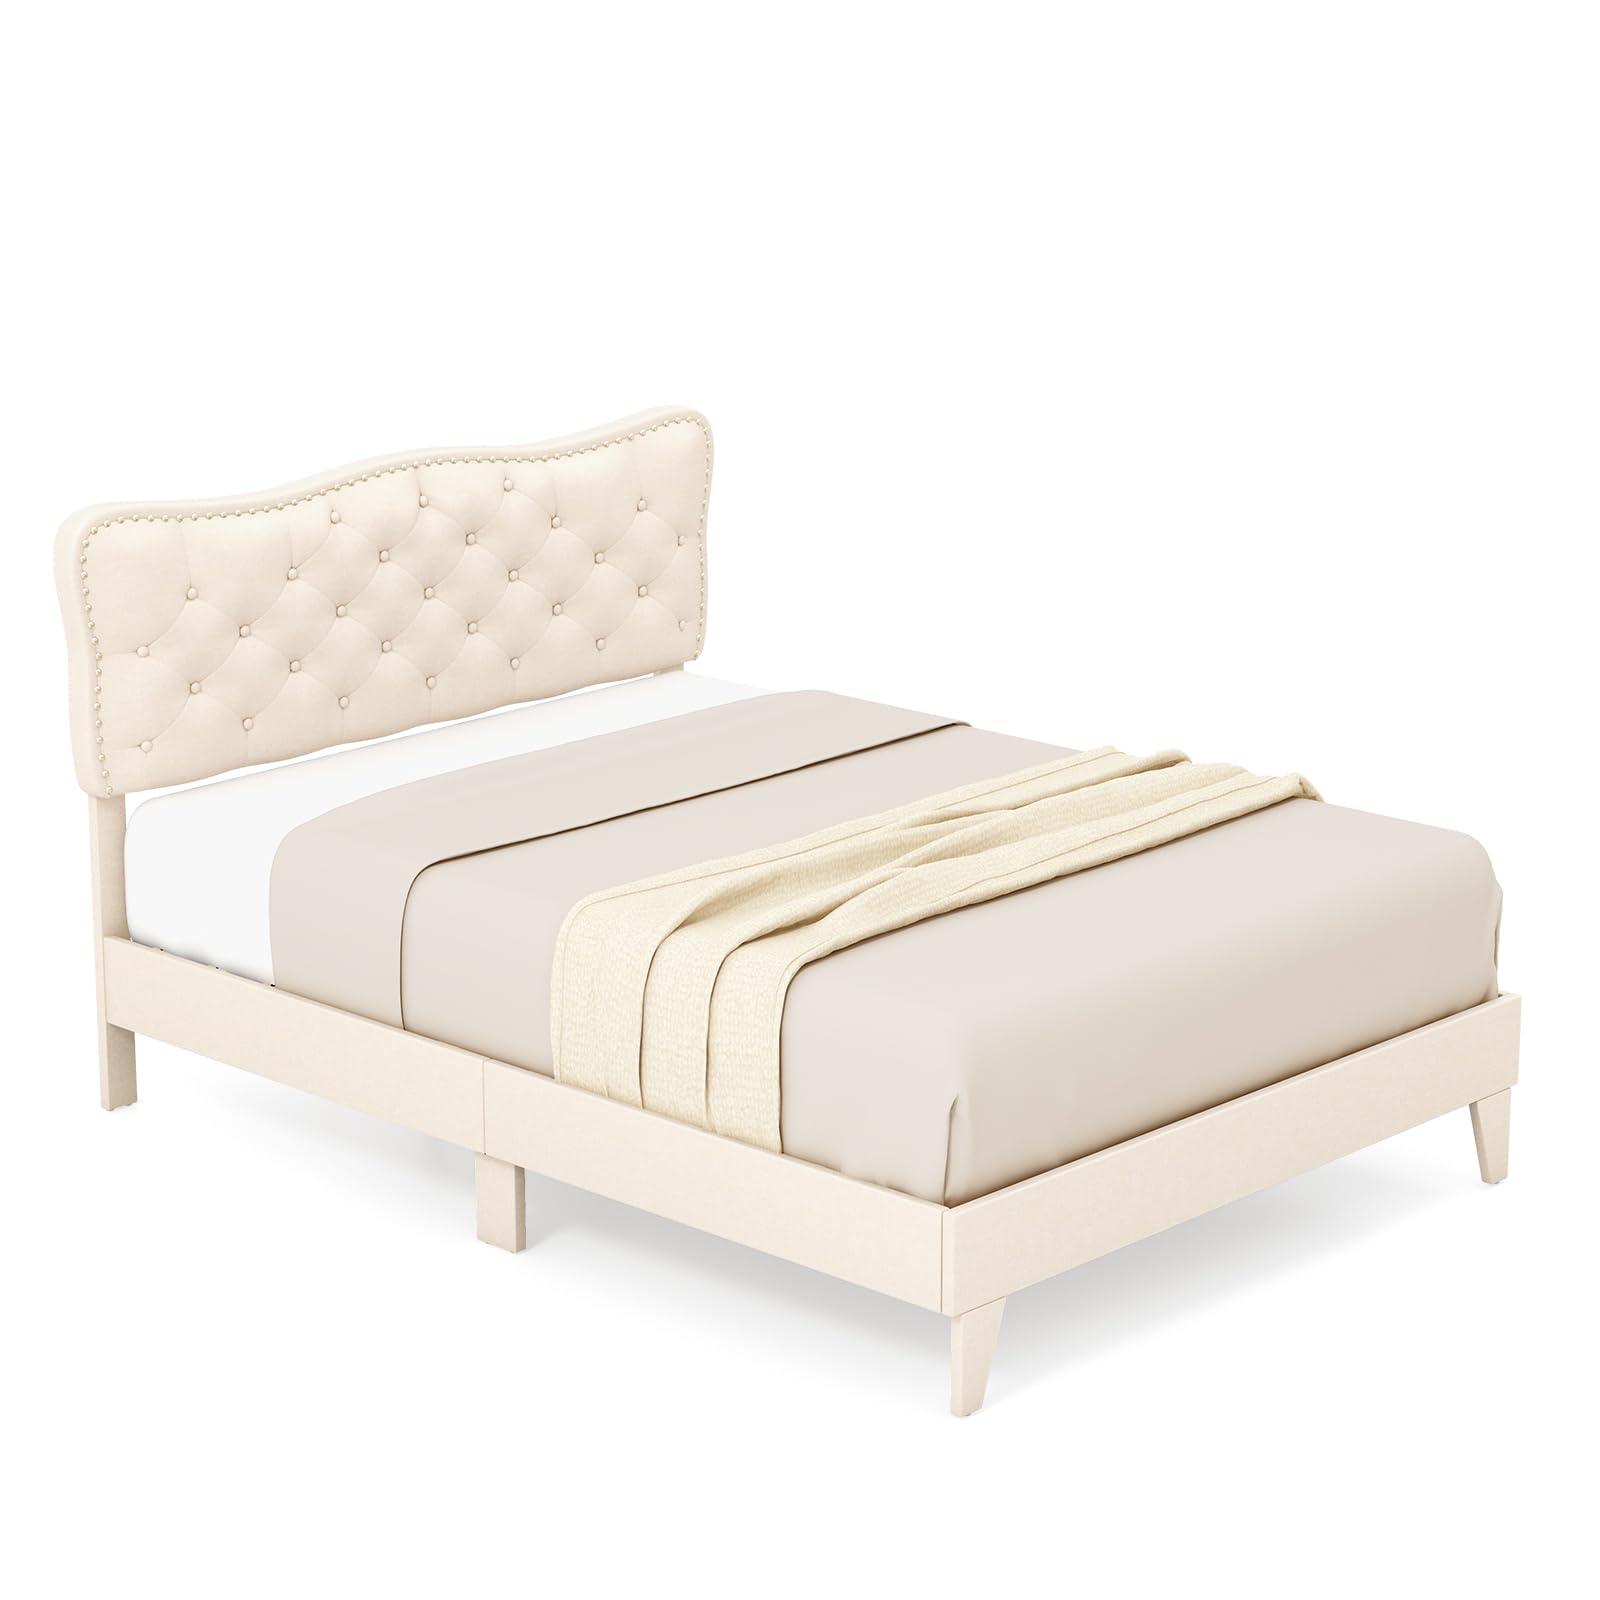 Giantex Full Size Bed Frame Beige, Linen Fabric Upholstered Platform Bed Frame with Nail Headboard